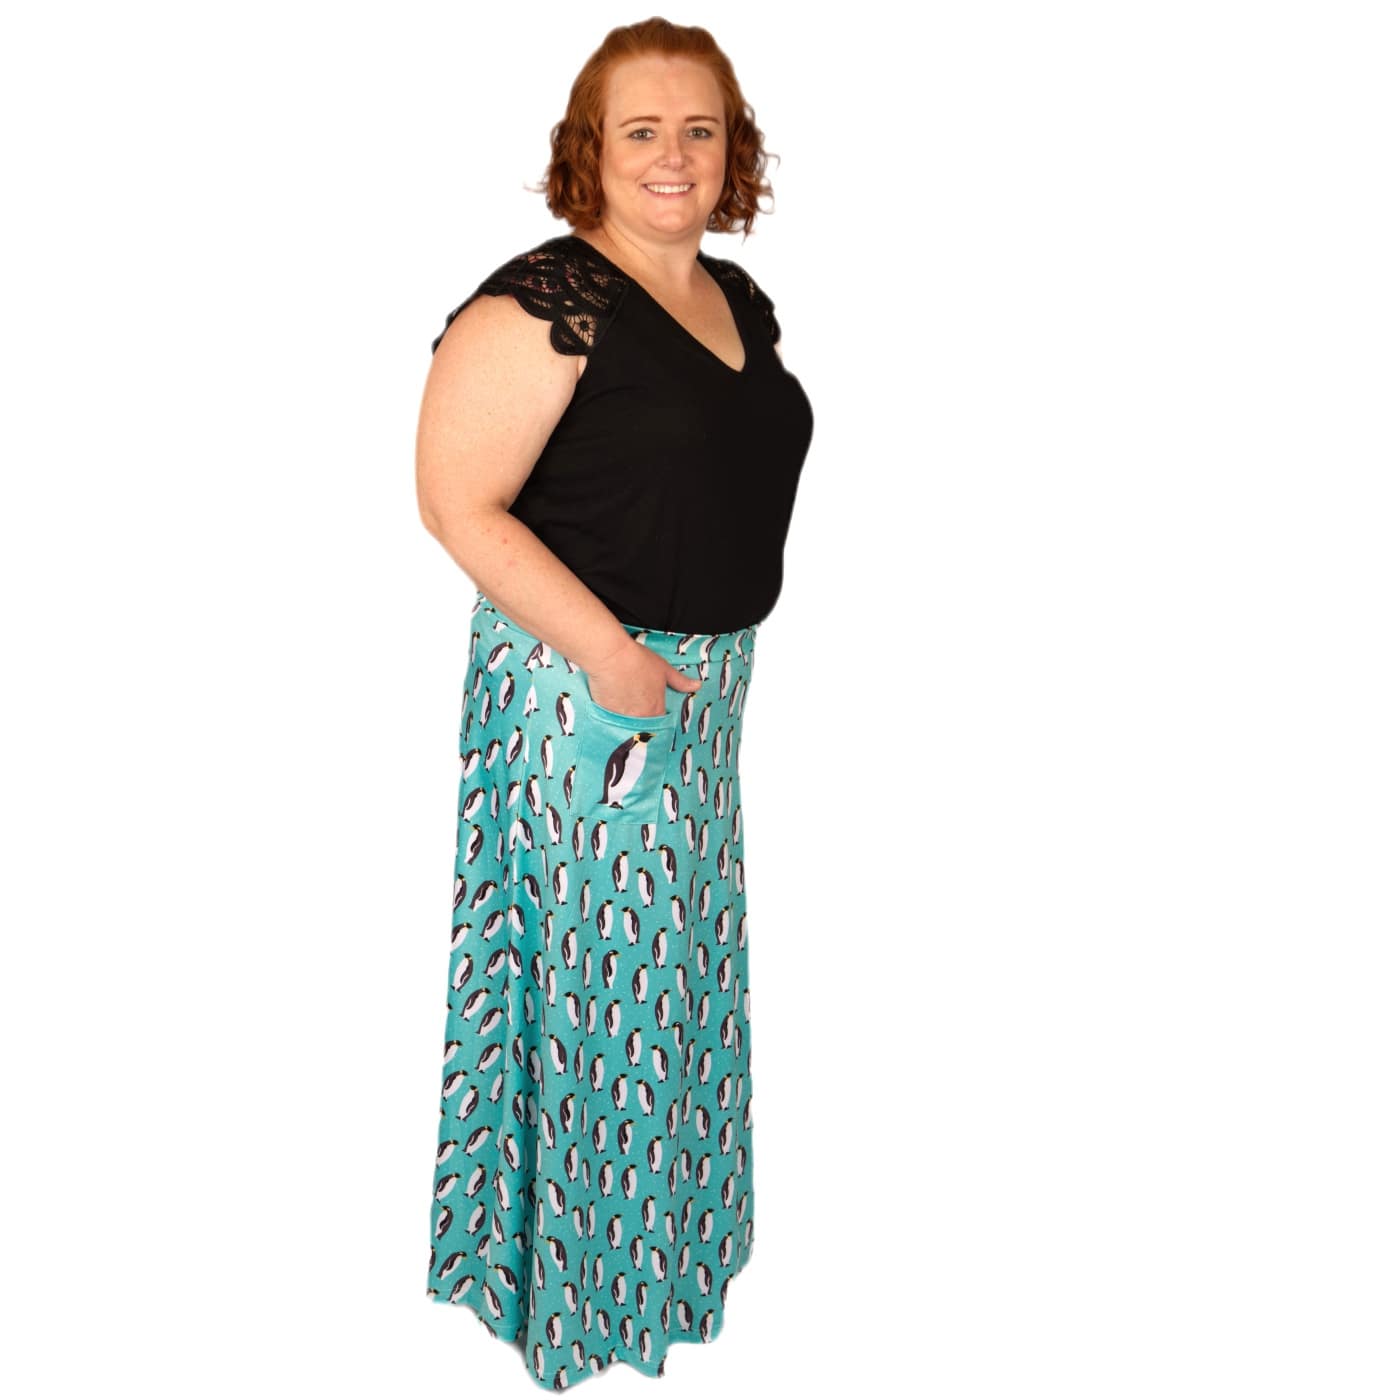 Waddle Maxi Skirt by RainbowsAndFairies.com.au (Emperor Penguin - Penguins - Animal Print - Long Skirt - Vintage Inspired - Boho - Skirt With Pockets) - SKU: CL_MAXIS_WADDL_ORG - Pic-05